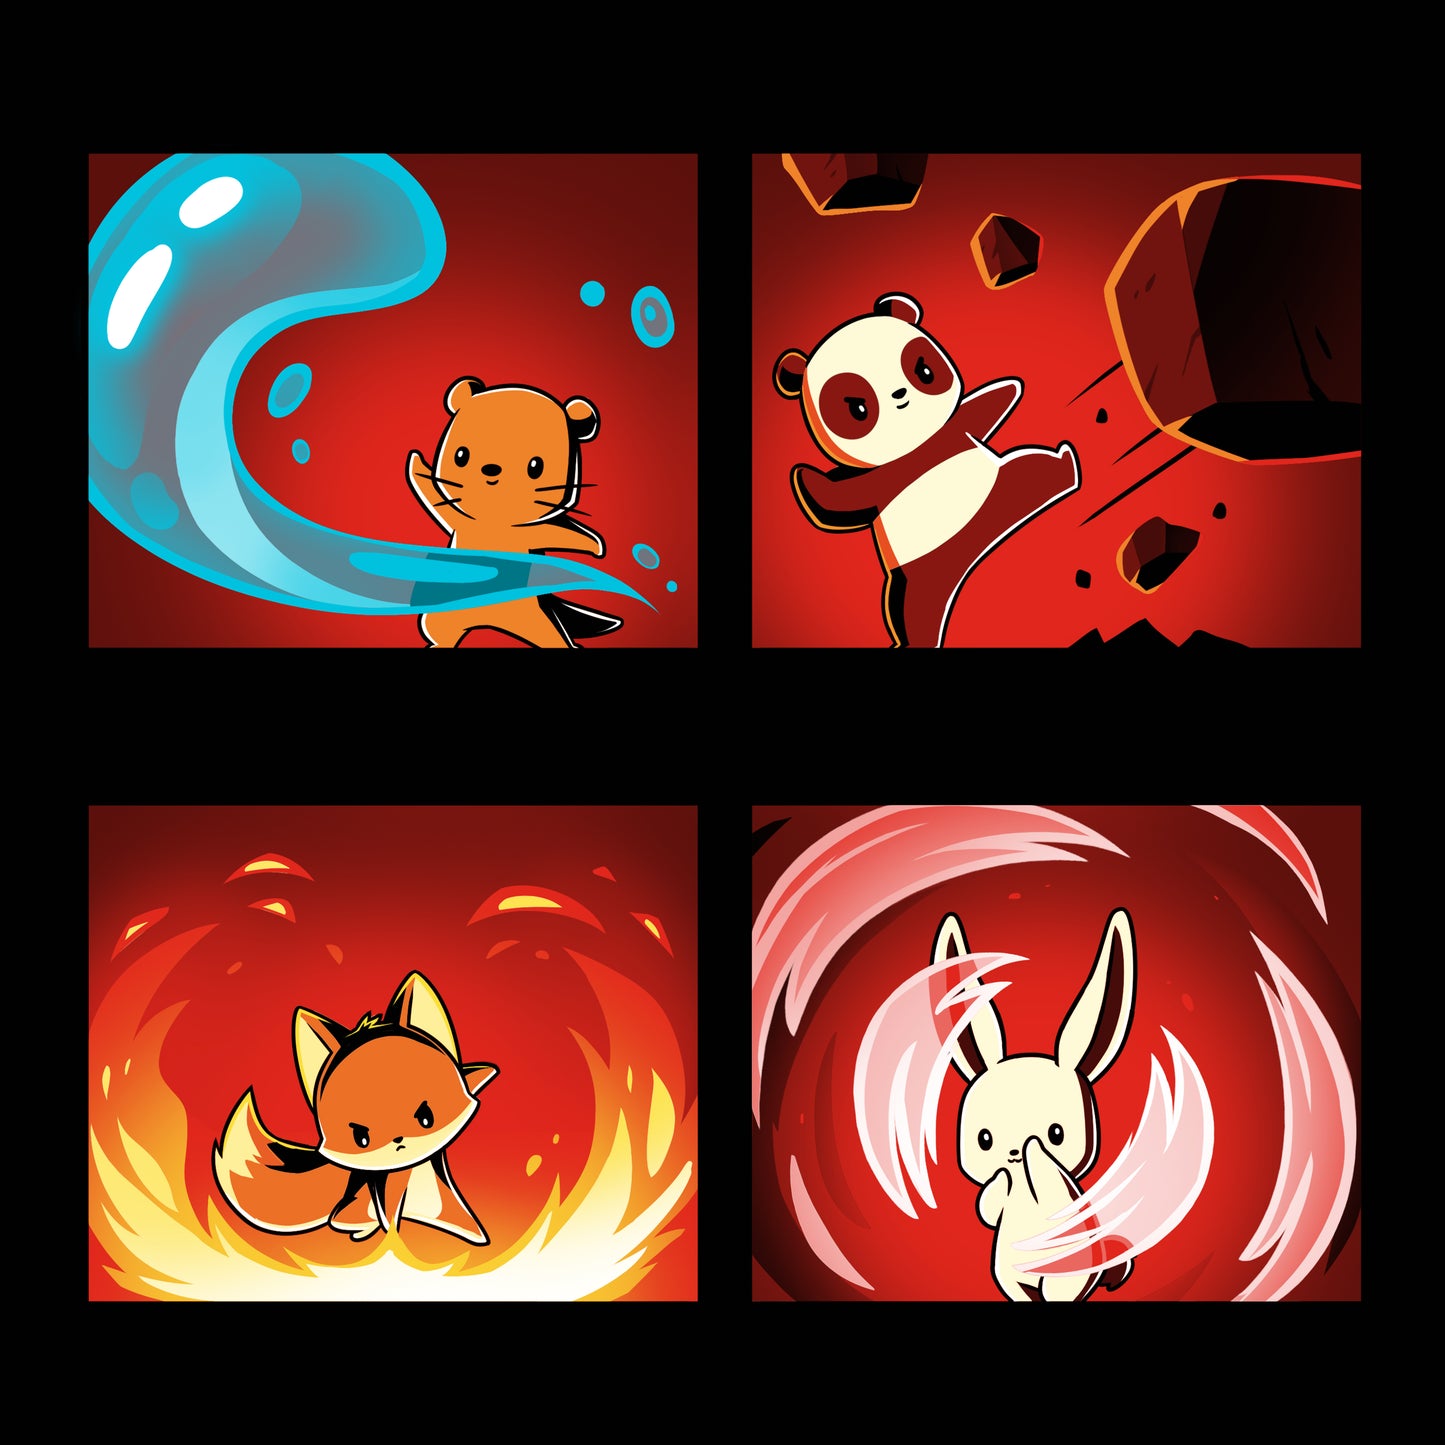 A set of four TeeTurtle Bending the Elements pictures featuring a panda and a fox, showcasing Earth bending.